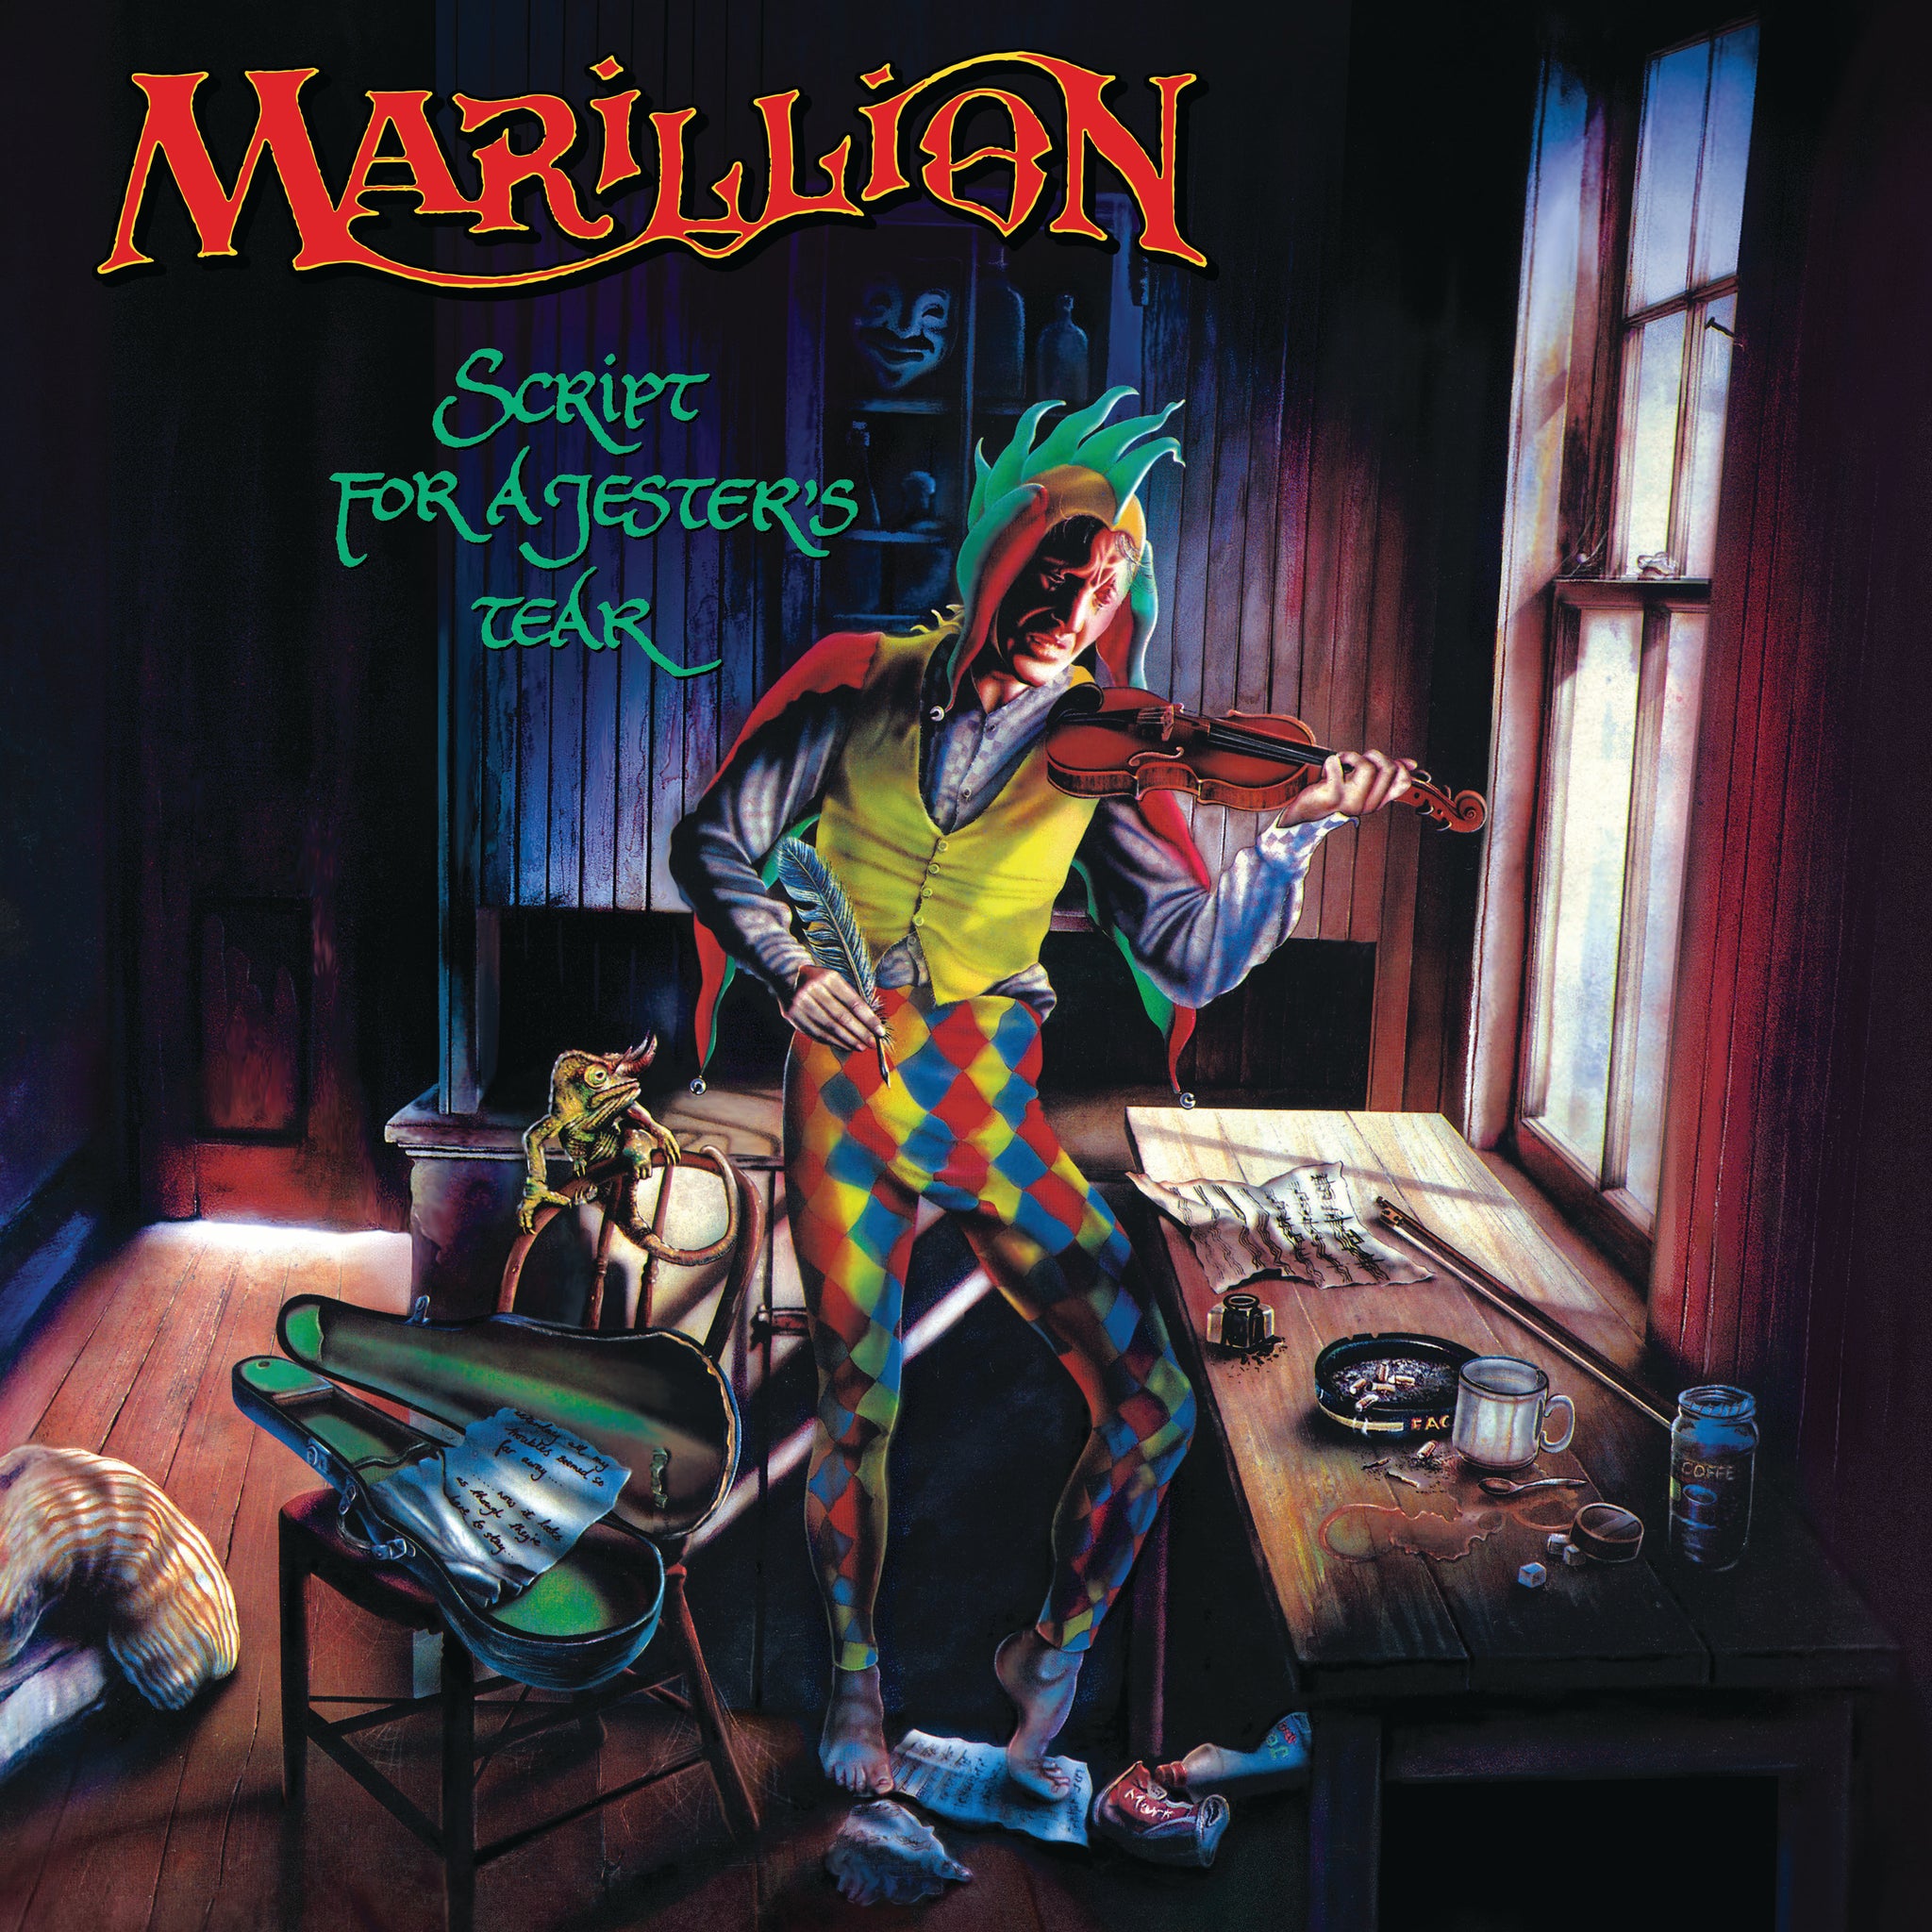 Marillion - Script For A Jesters Tear (2020 Stereo Mix)